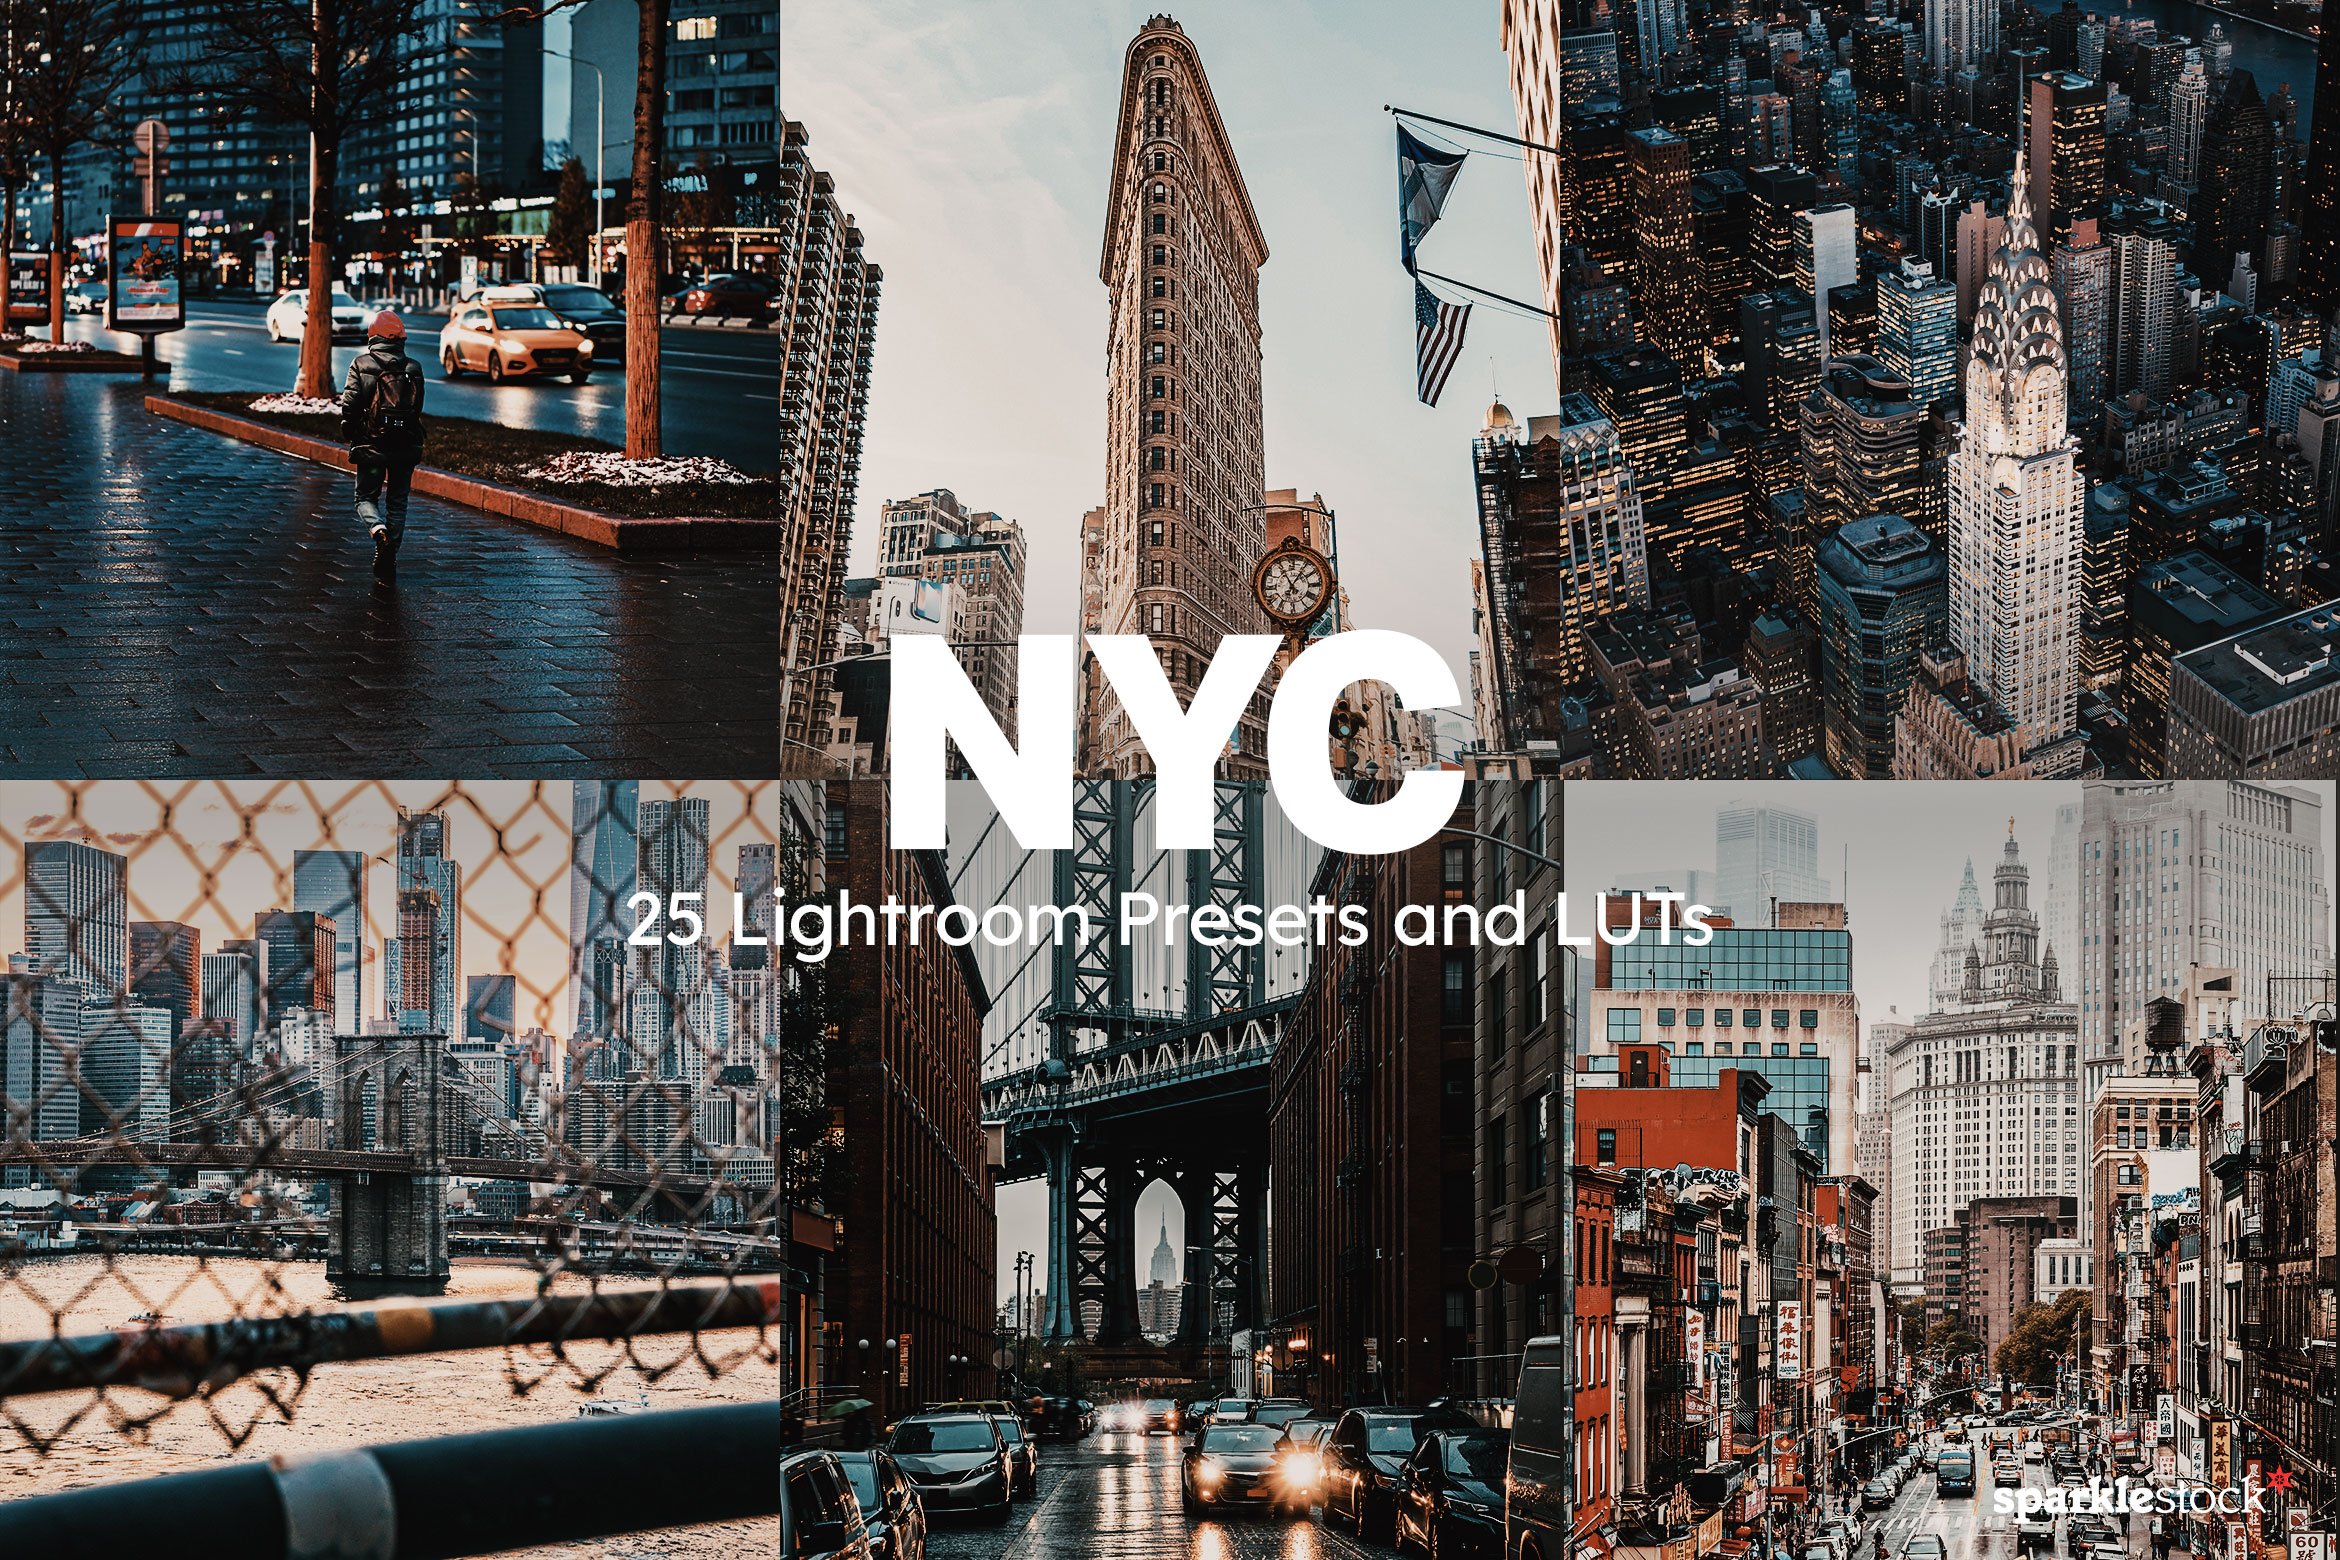 25 NYC Lightroom Presets and LUTscover image.